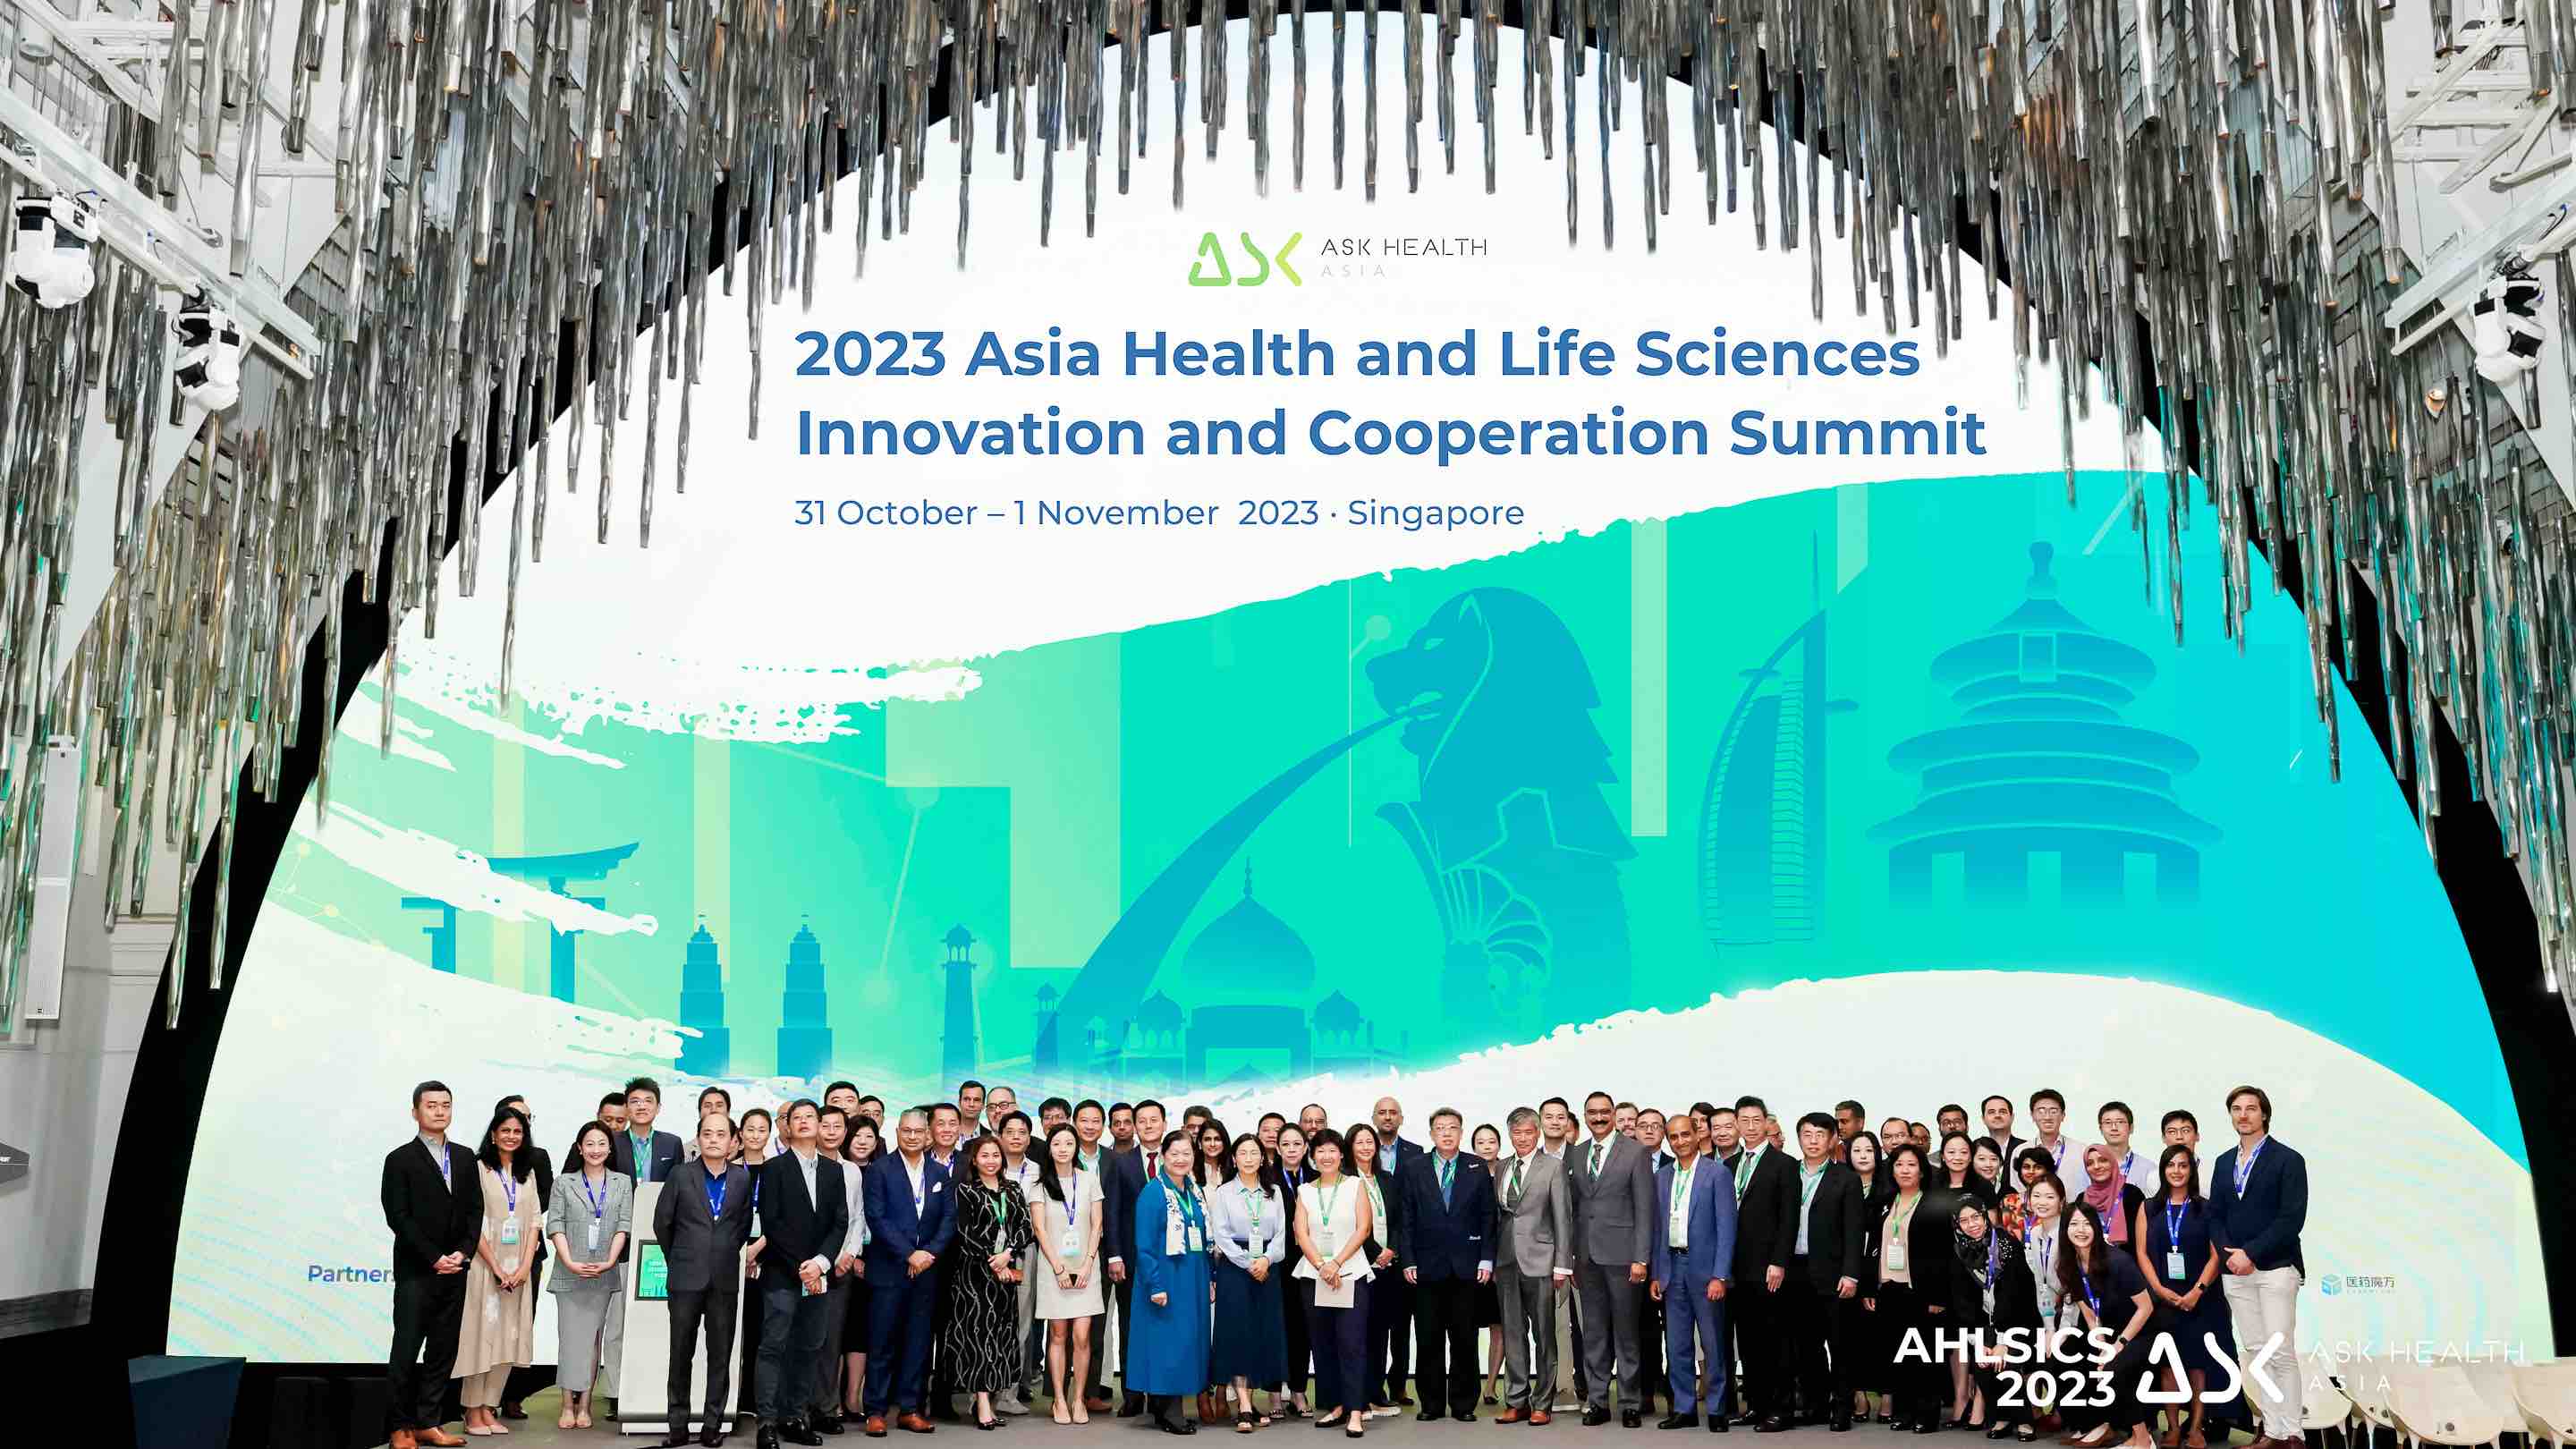 2023 Asia Health and Life Sciences Innovation and Cooperation Summit